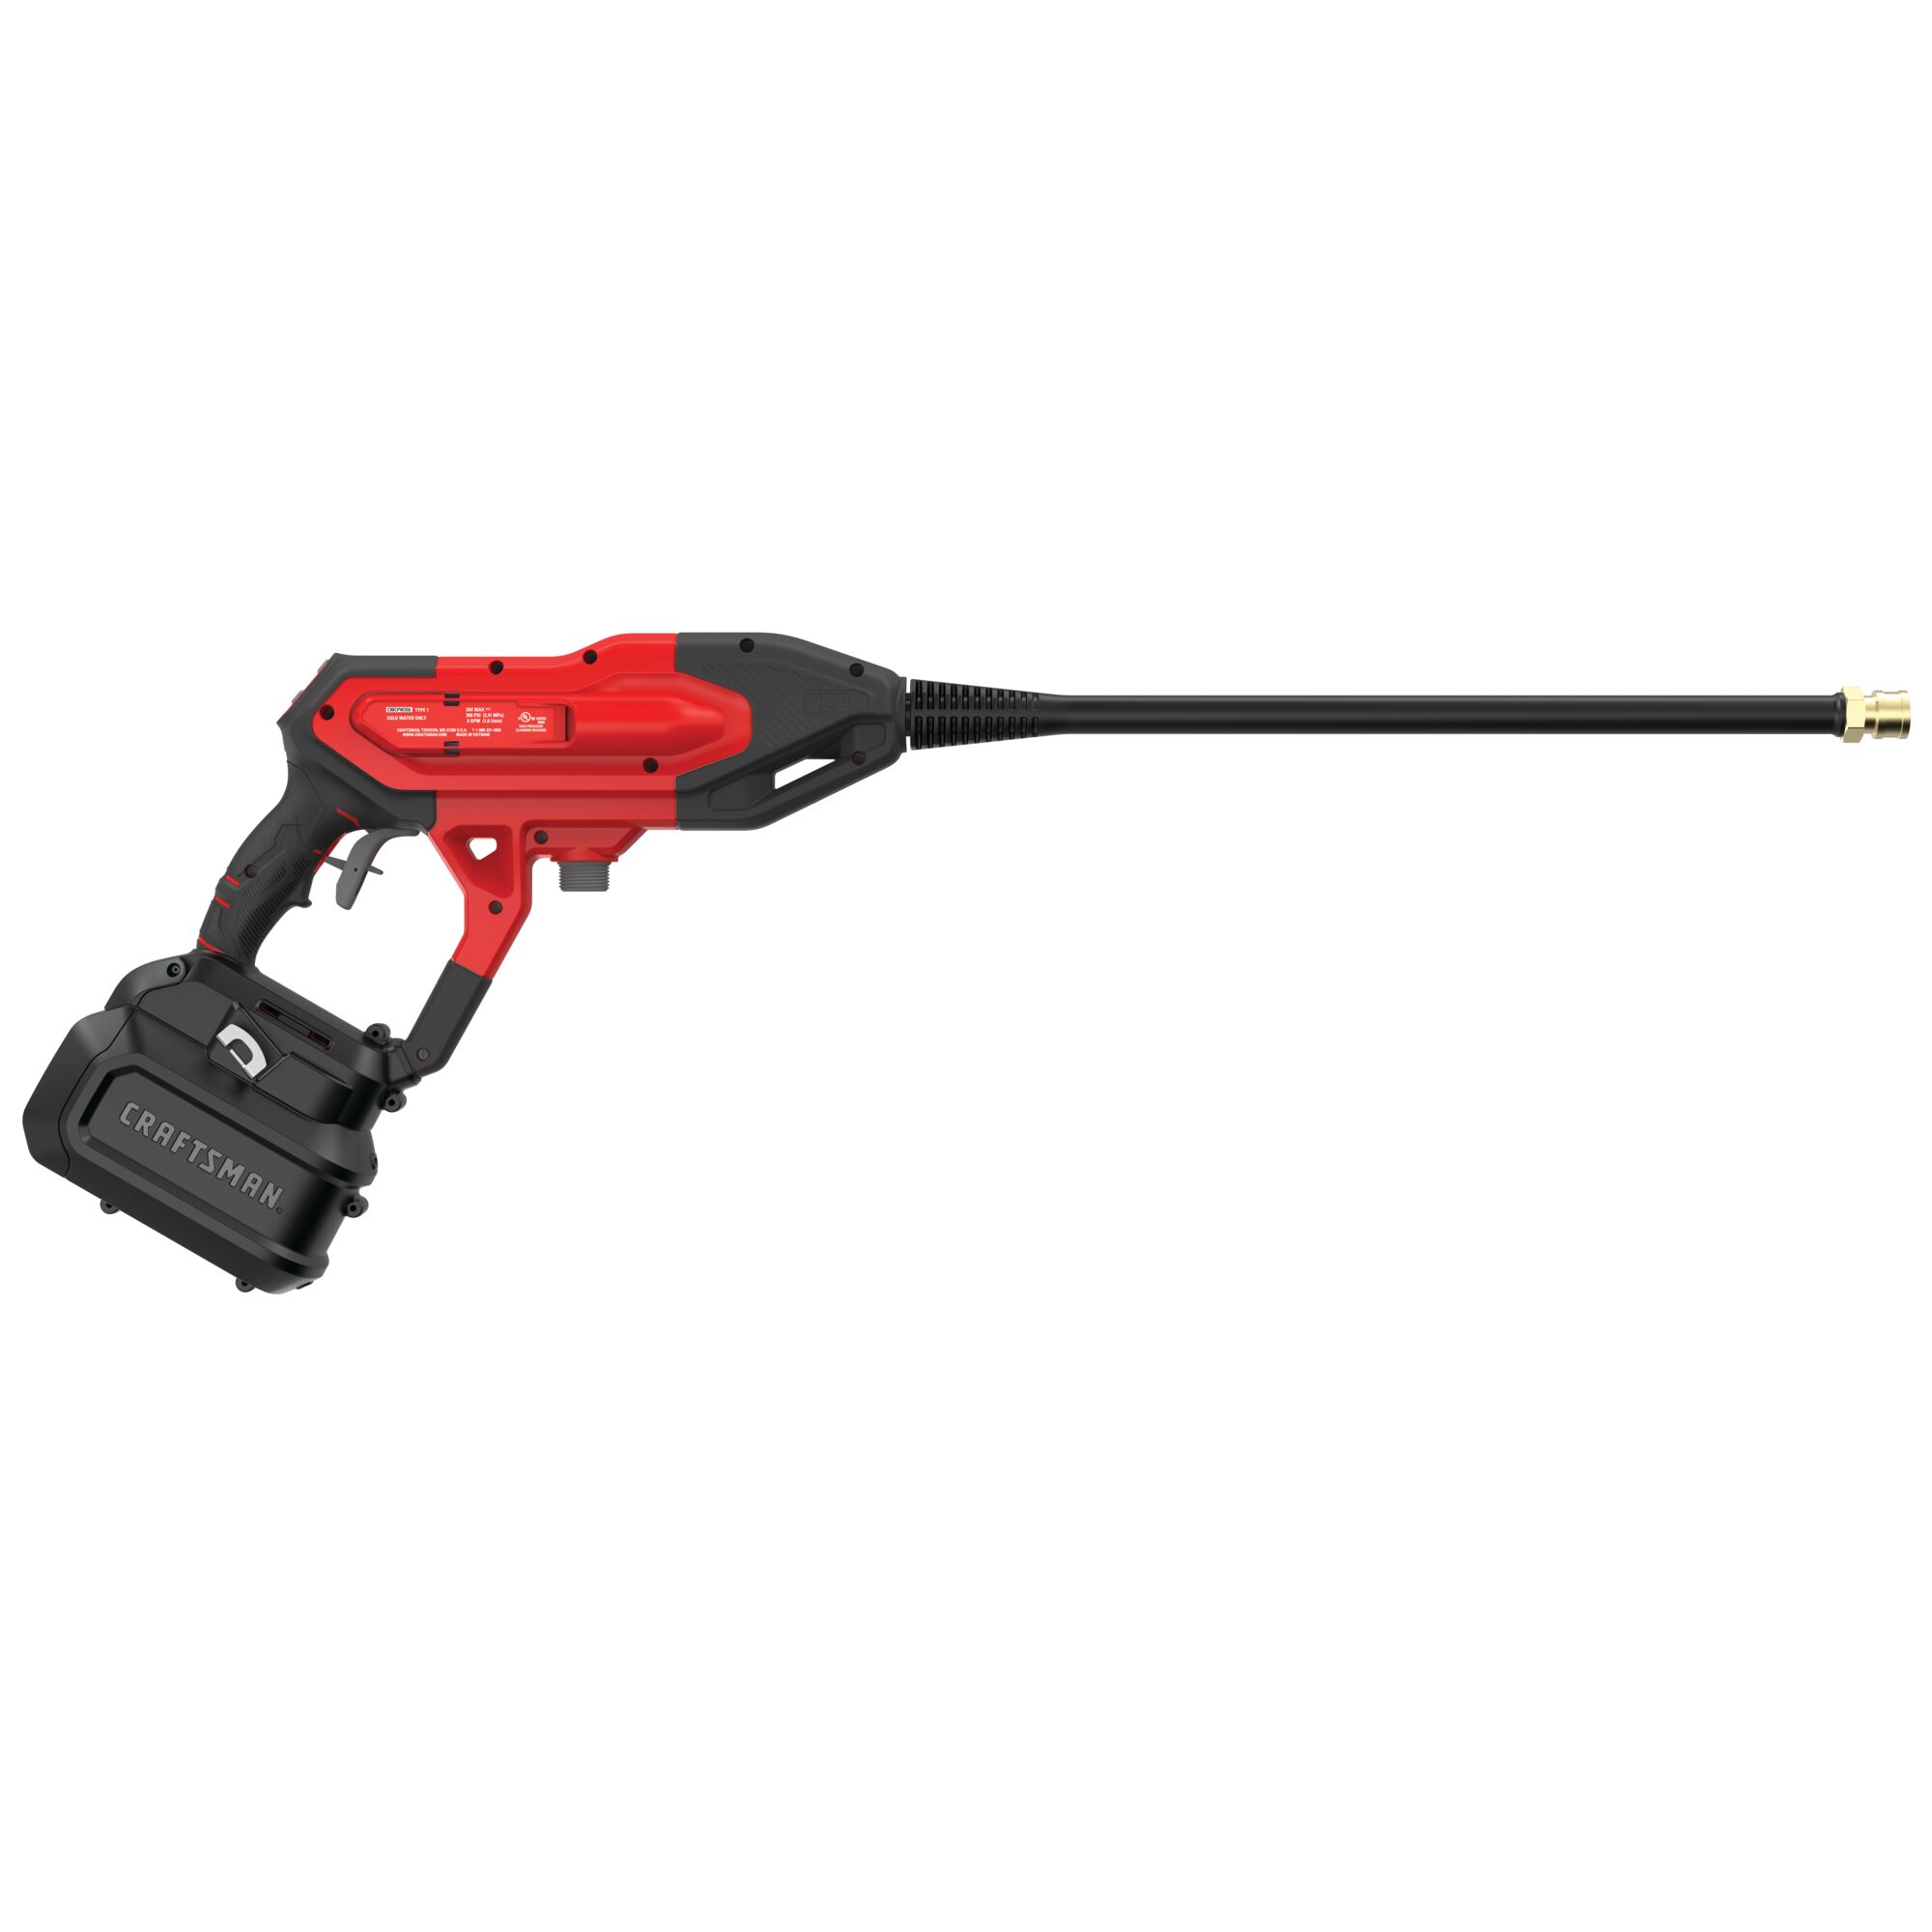 Left profile of 20 volt cordless 350 max P S I power cleaner.